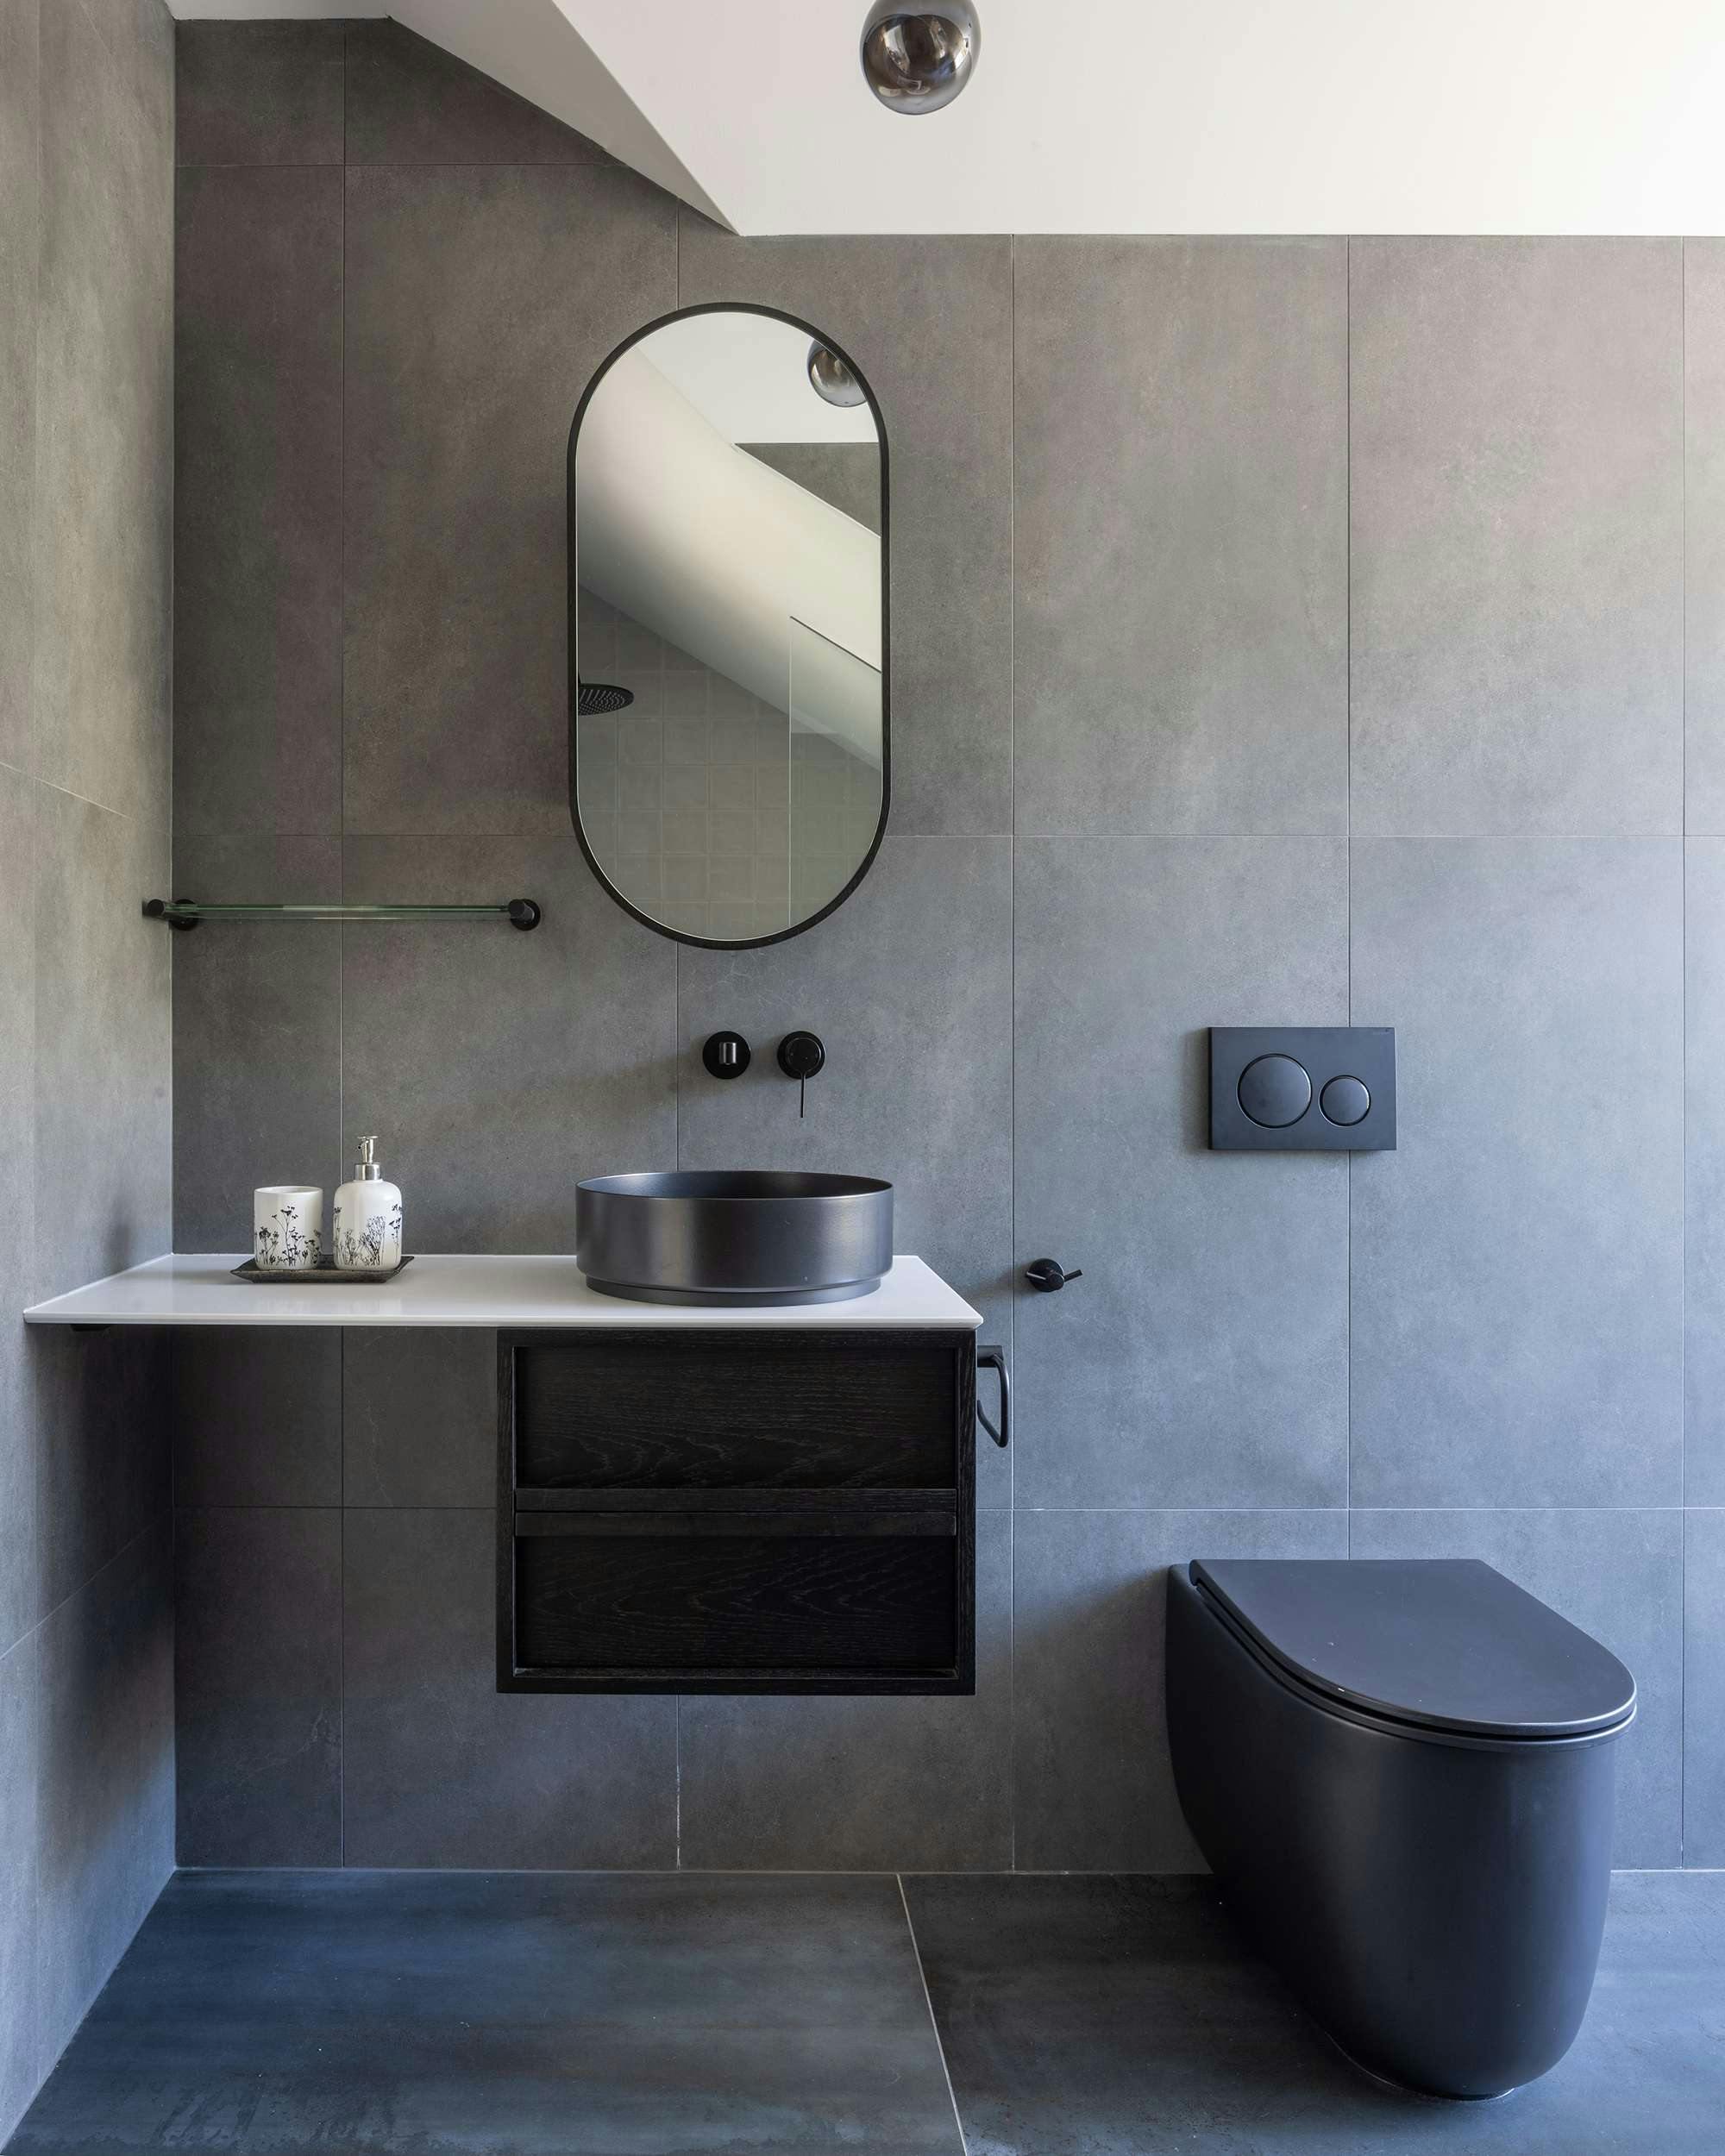 An interior shot of the new ensuite with black fixtures and a round mirror above a basin